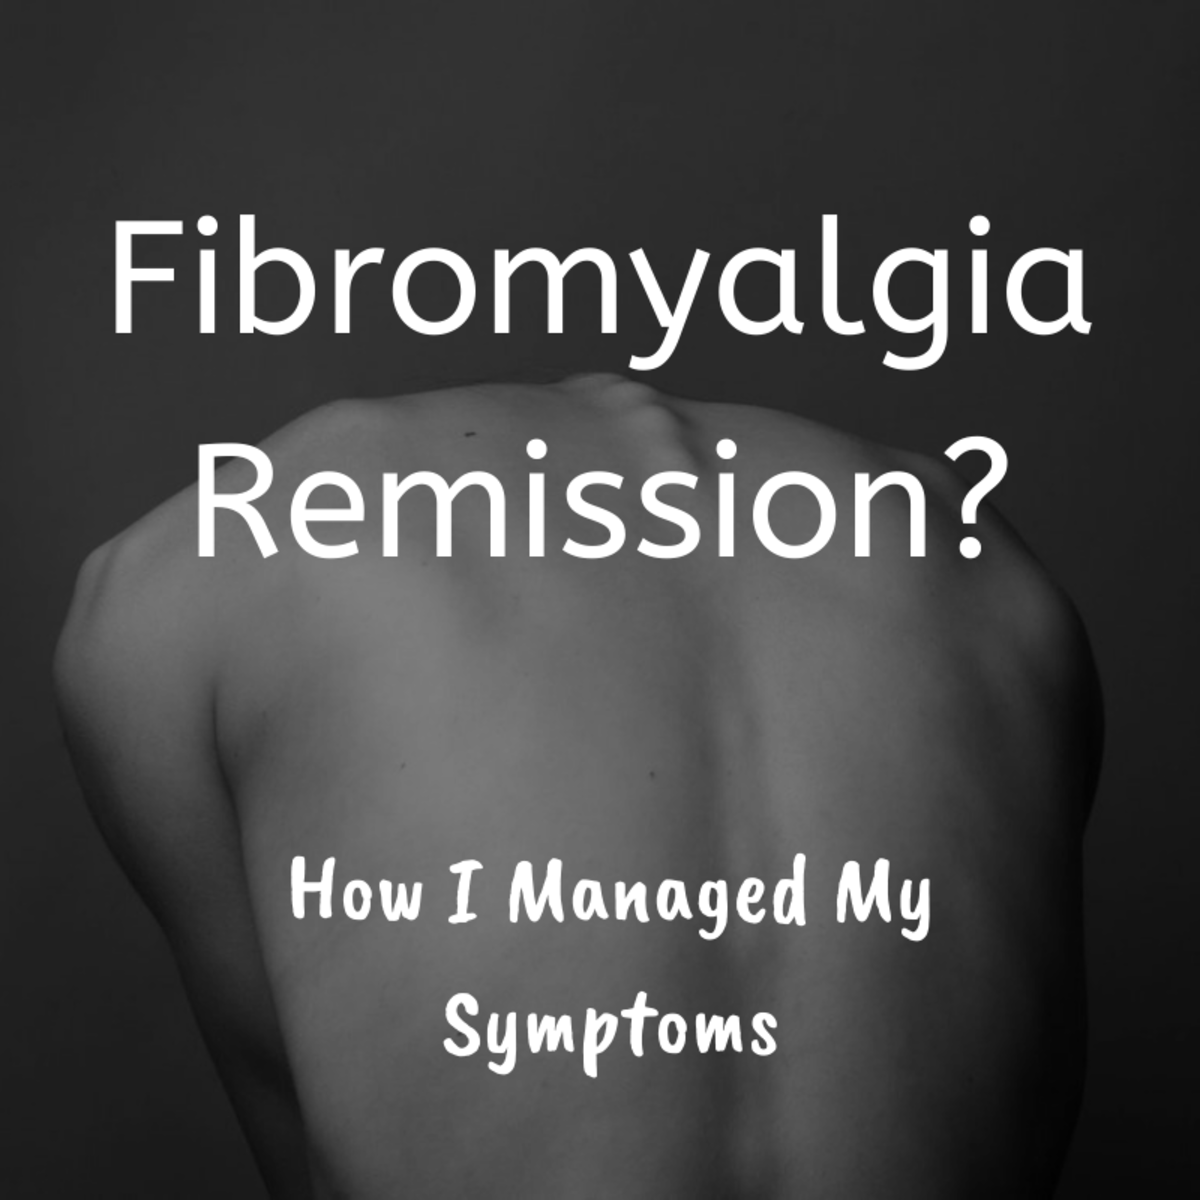 My Experience With Fibromyalgia Remission